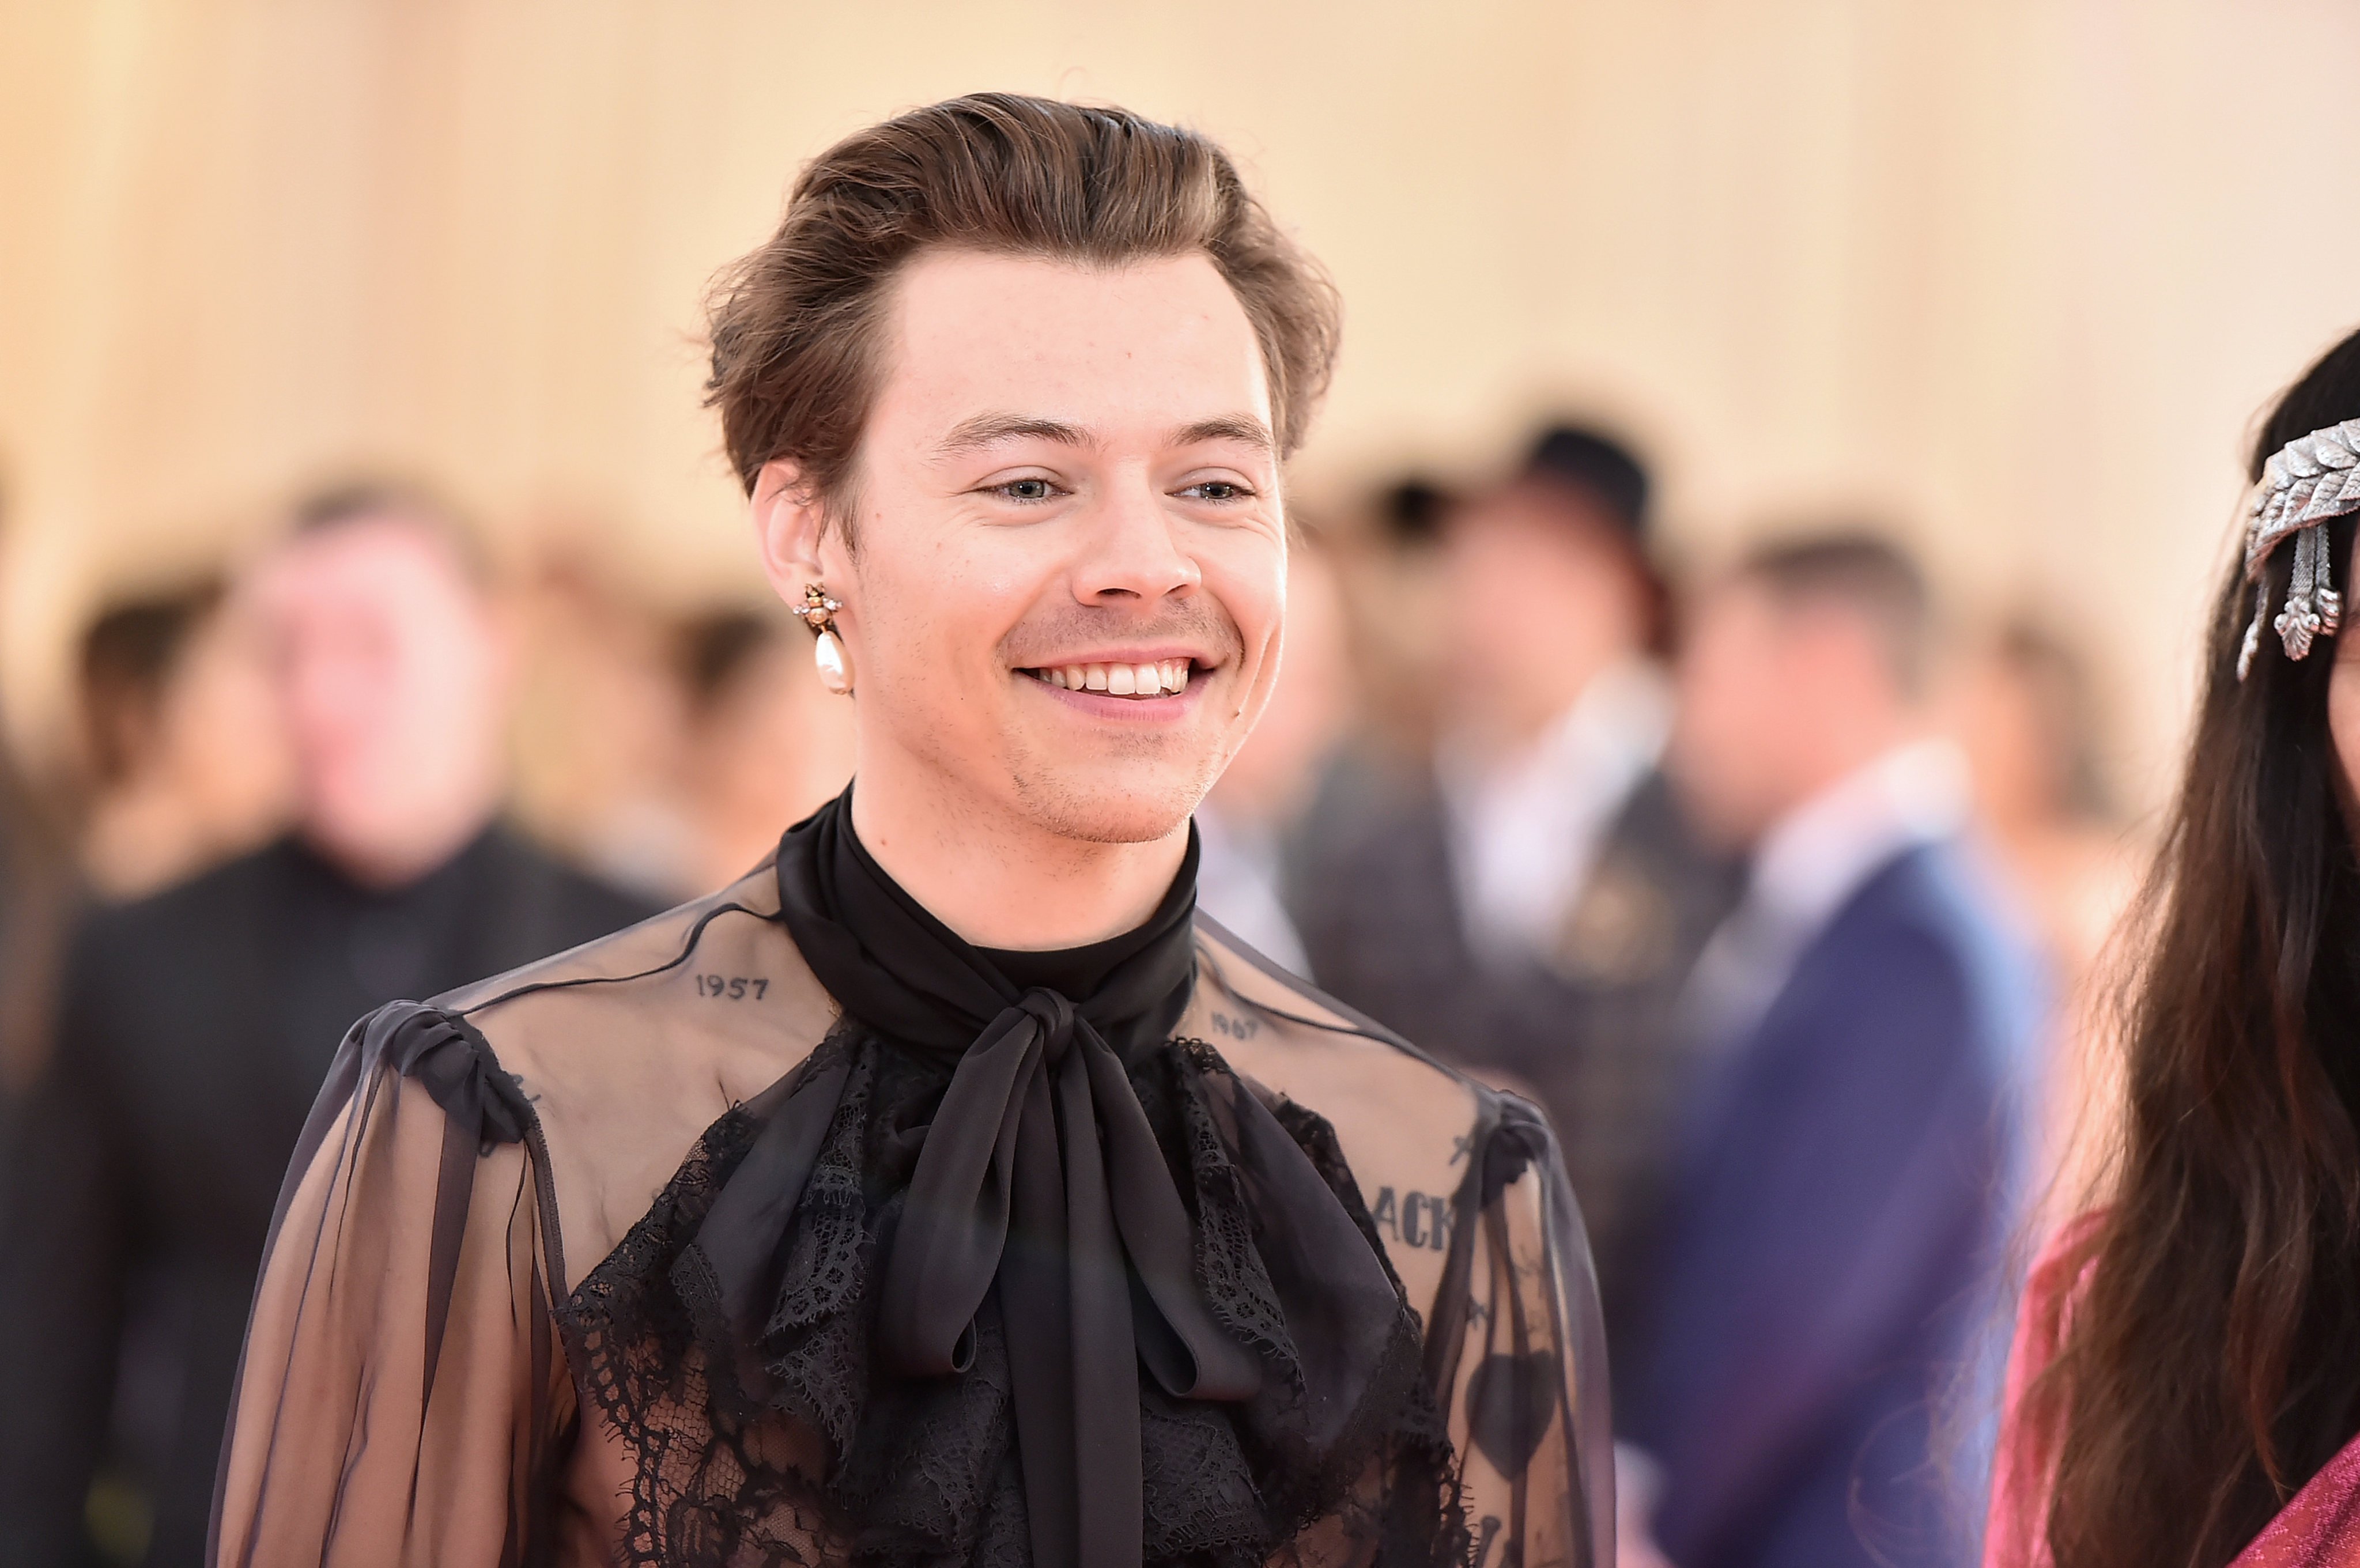 Harry Styles rocking feminine jewellery the 2019 Met Gala, which carried the theme “Celebrating Camp: Notes on Fashion”. Photo: WireImage